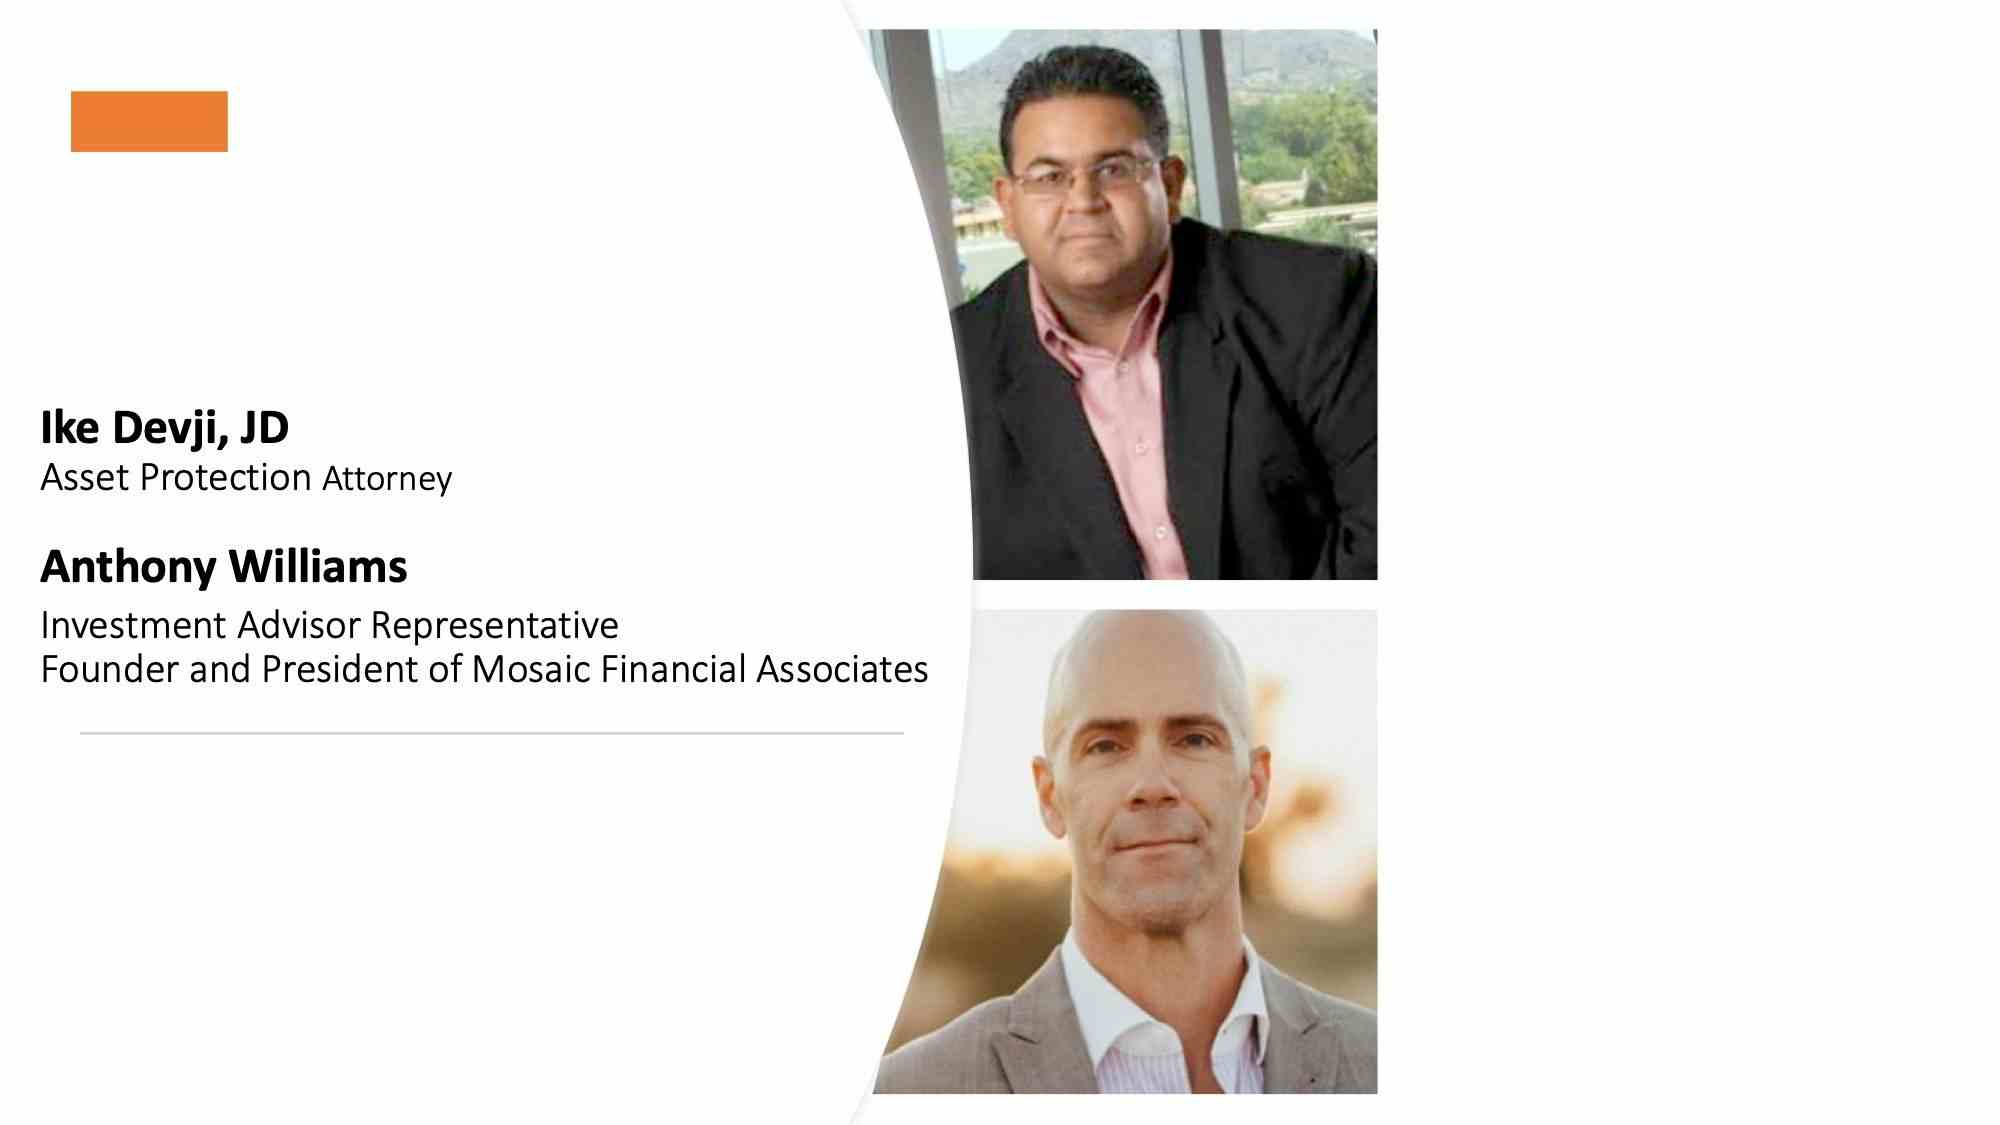 Ike Devji, JD, and Anthony Williams discuss wealth management